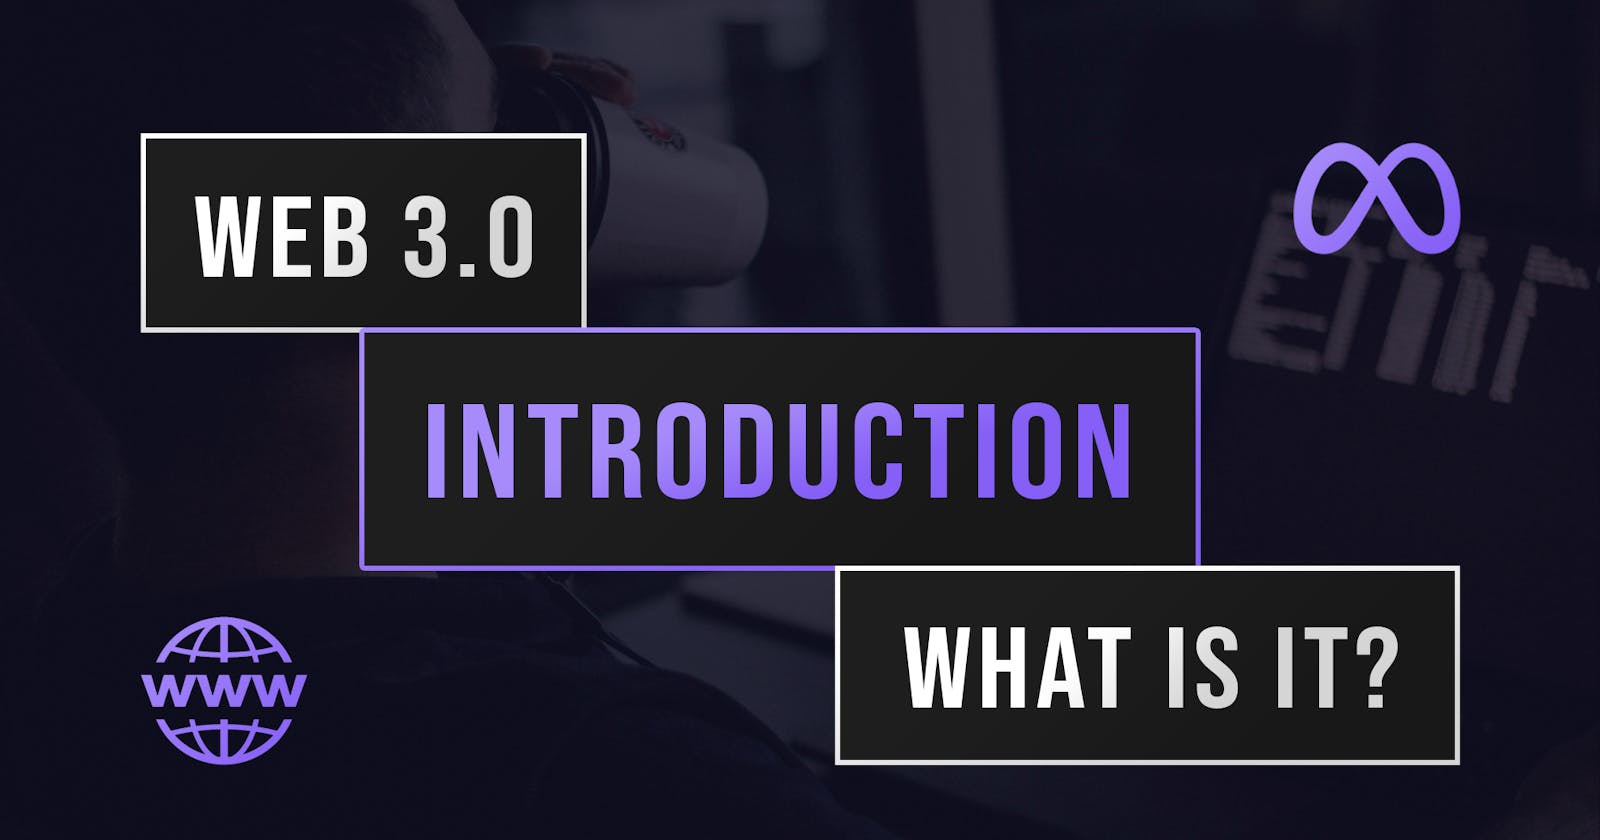 Web 3.0 Introduction: What is it?